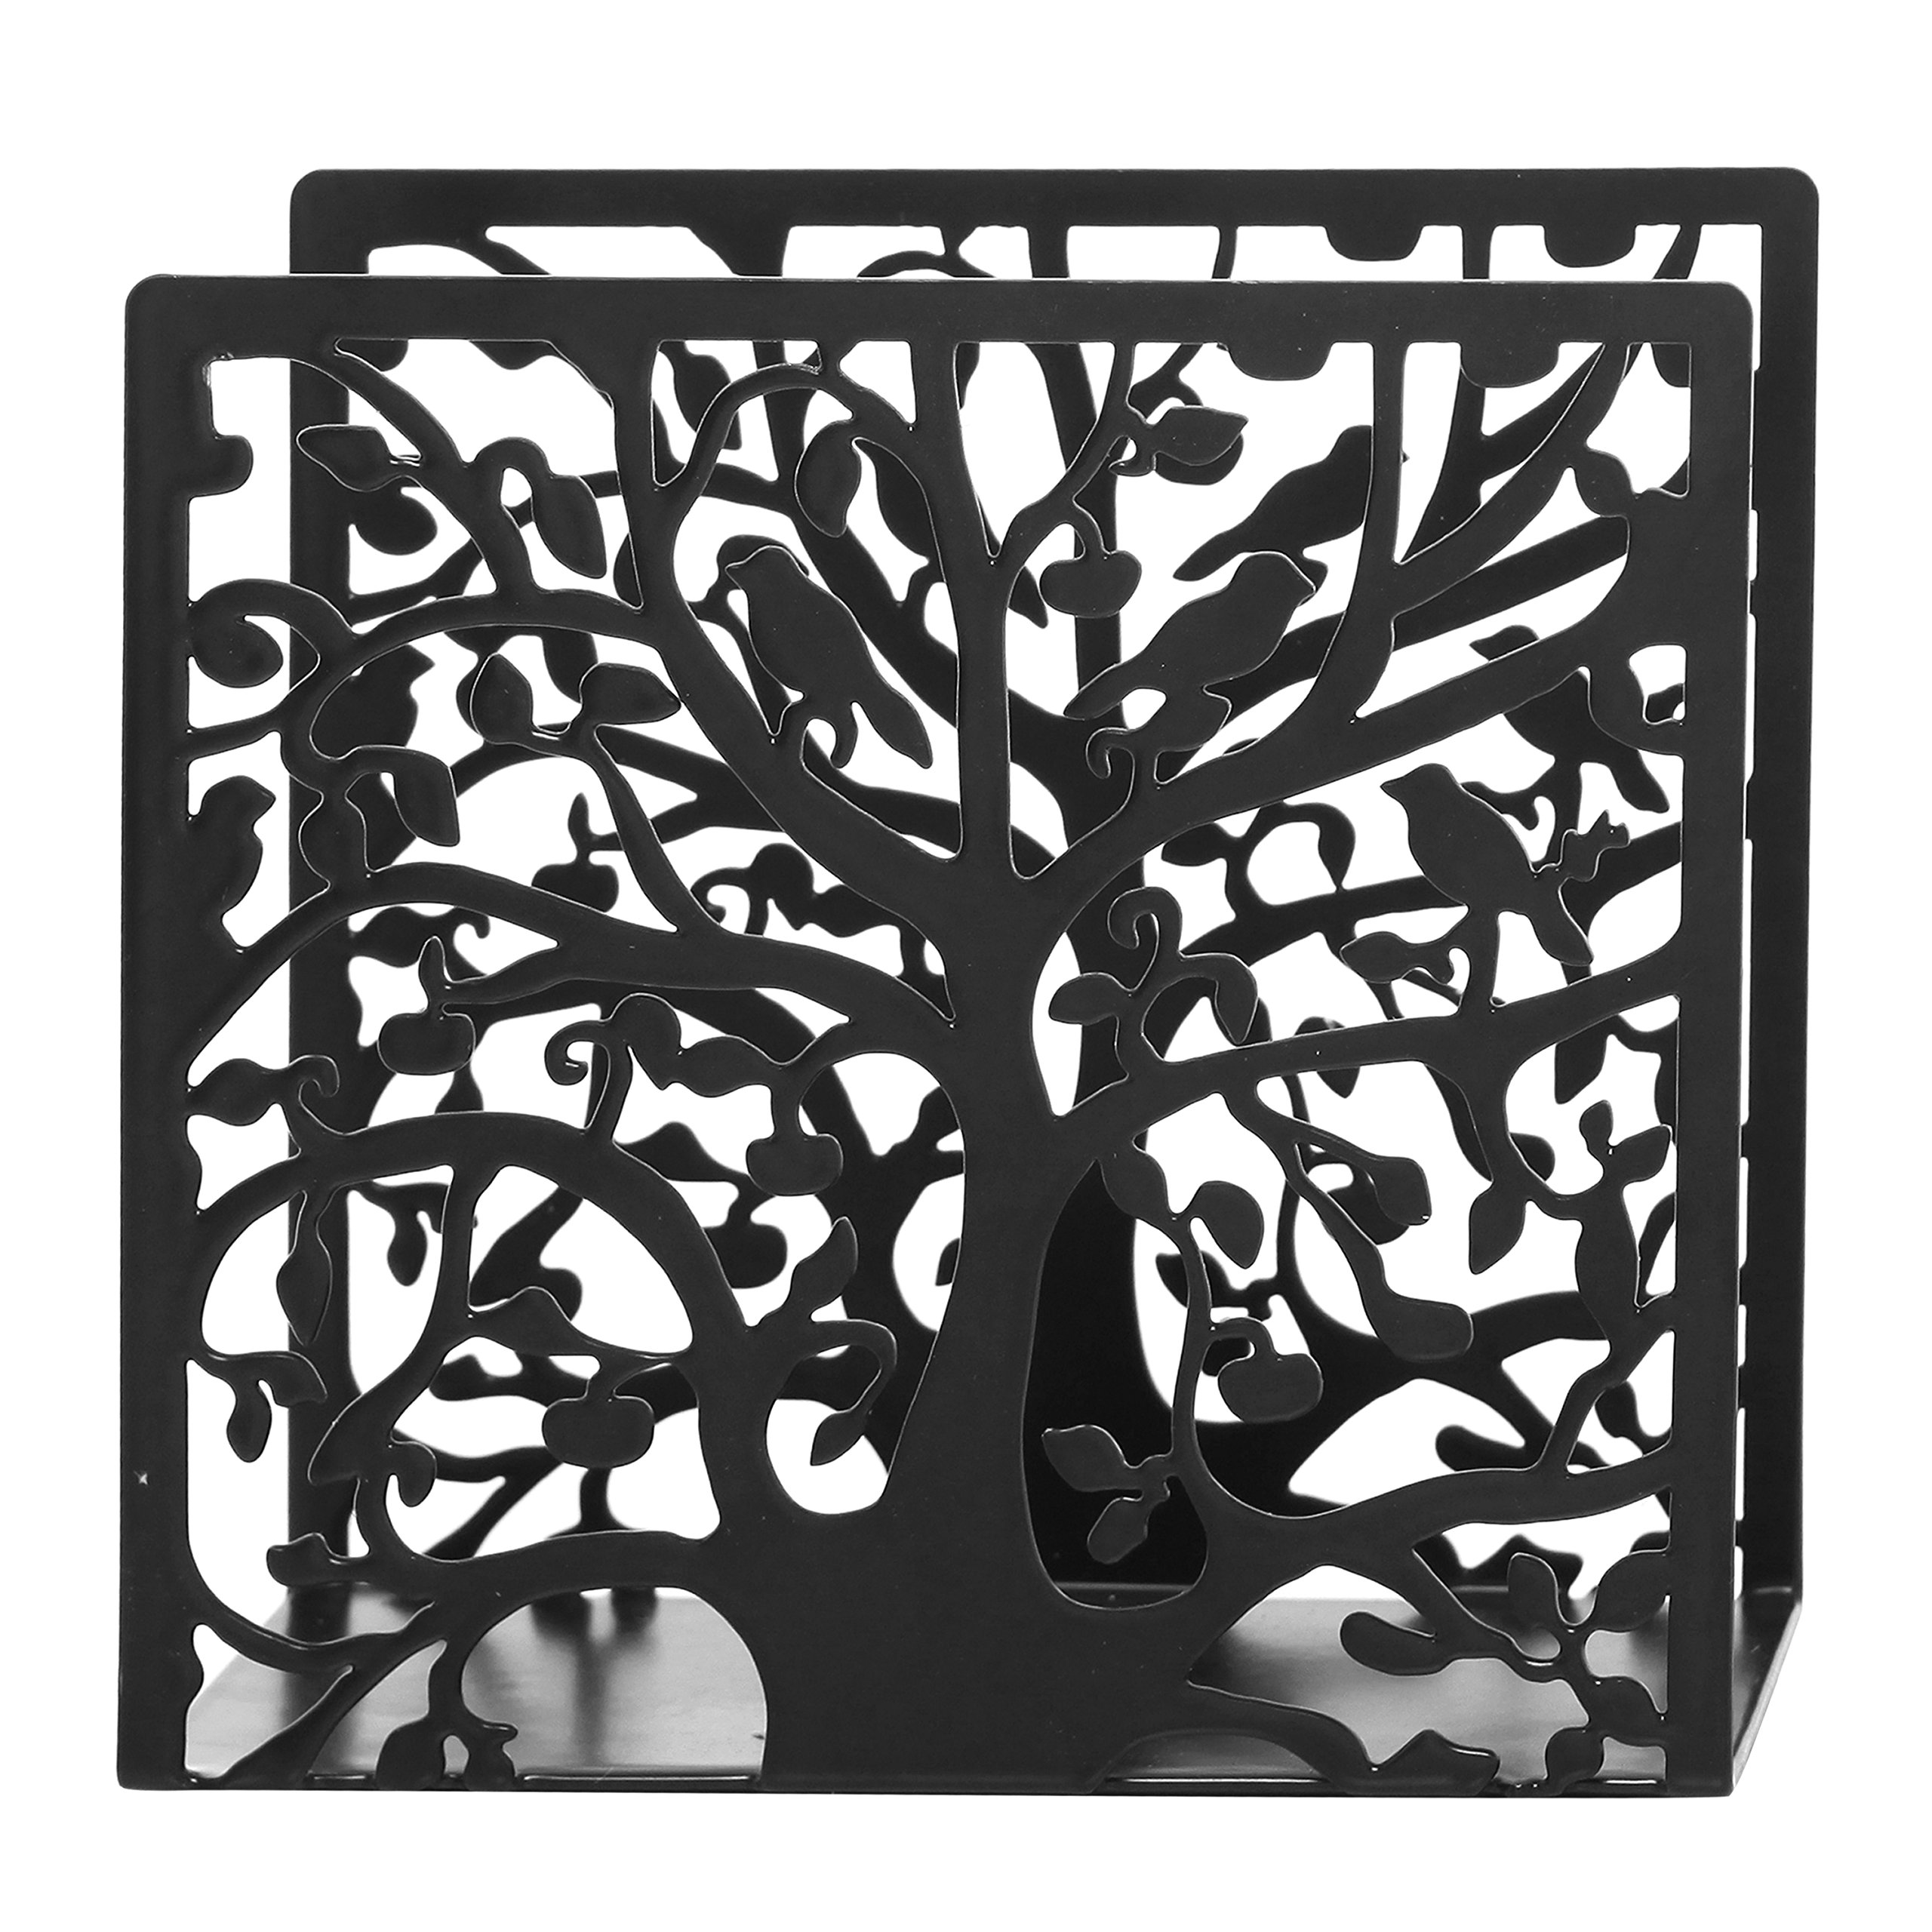 MyGift Black Metal Napkin Holder Cutout Tree and Bird Design for Table Top, Counter Top, Kitchen, Buffet, Restaurant, Dinner Party, Holiday Gifts